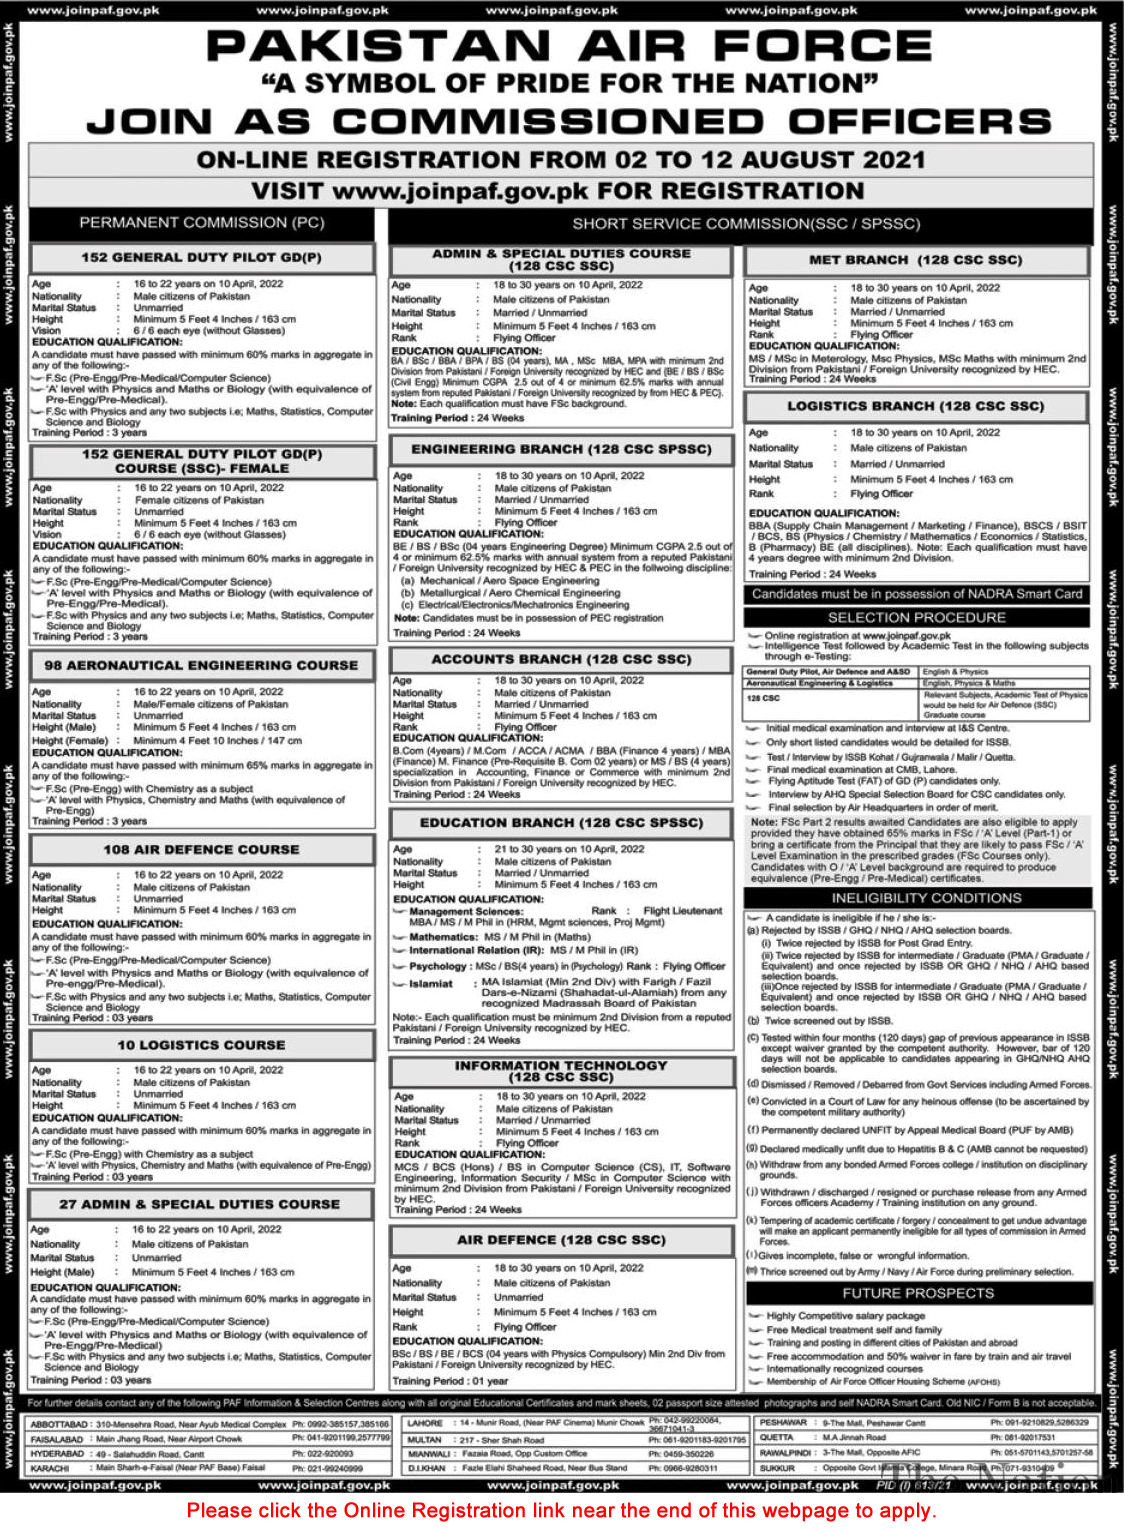 Join Pakistan Air Force as Commissioned Officer August 2021 Online Registration in SPSSC & Permanent Commission Latest